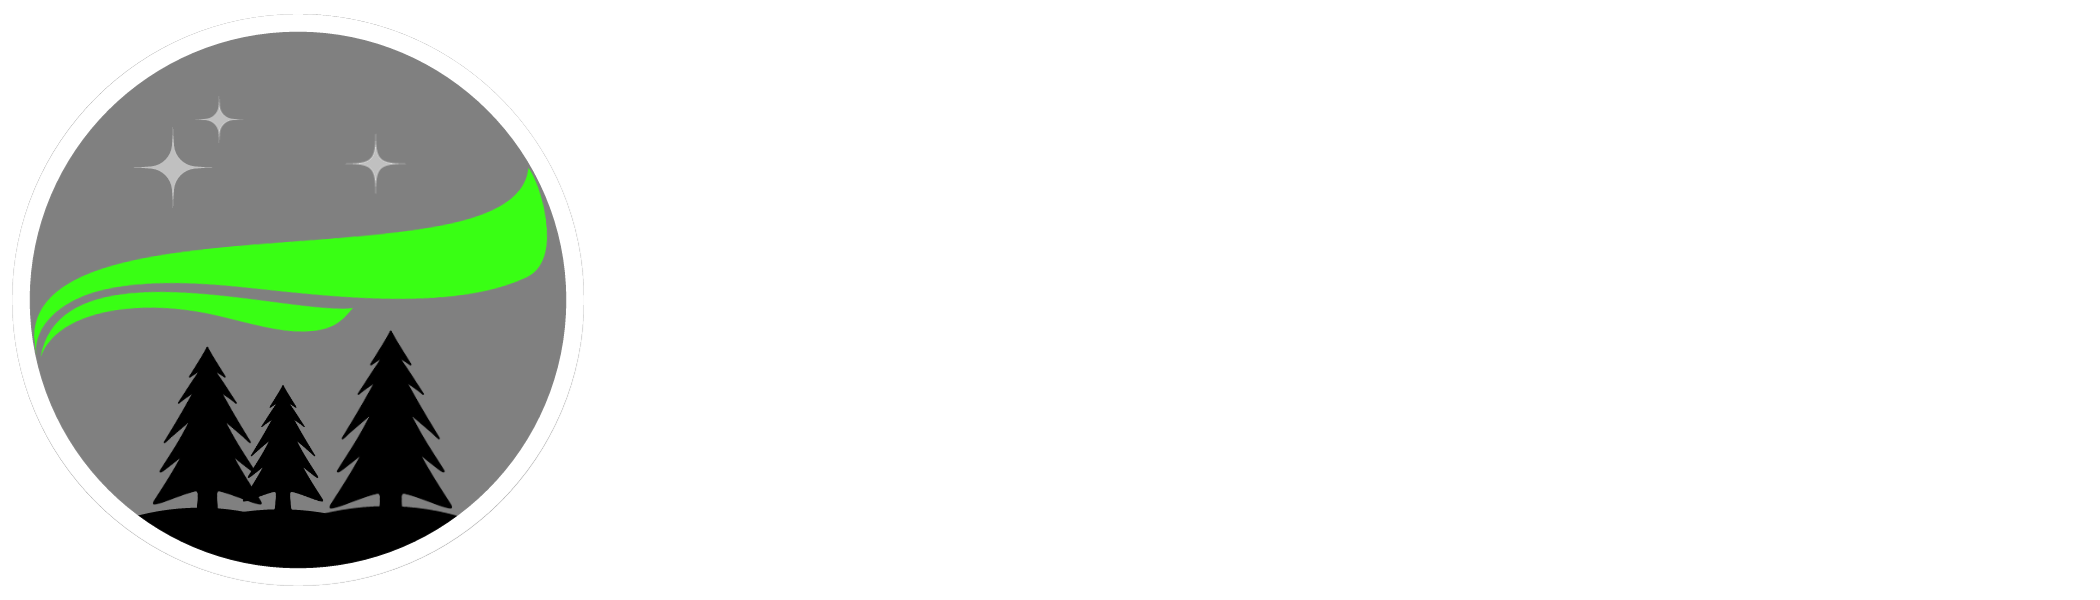 North Sky Electric